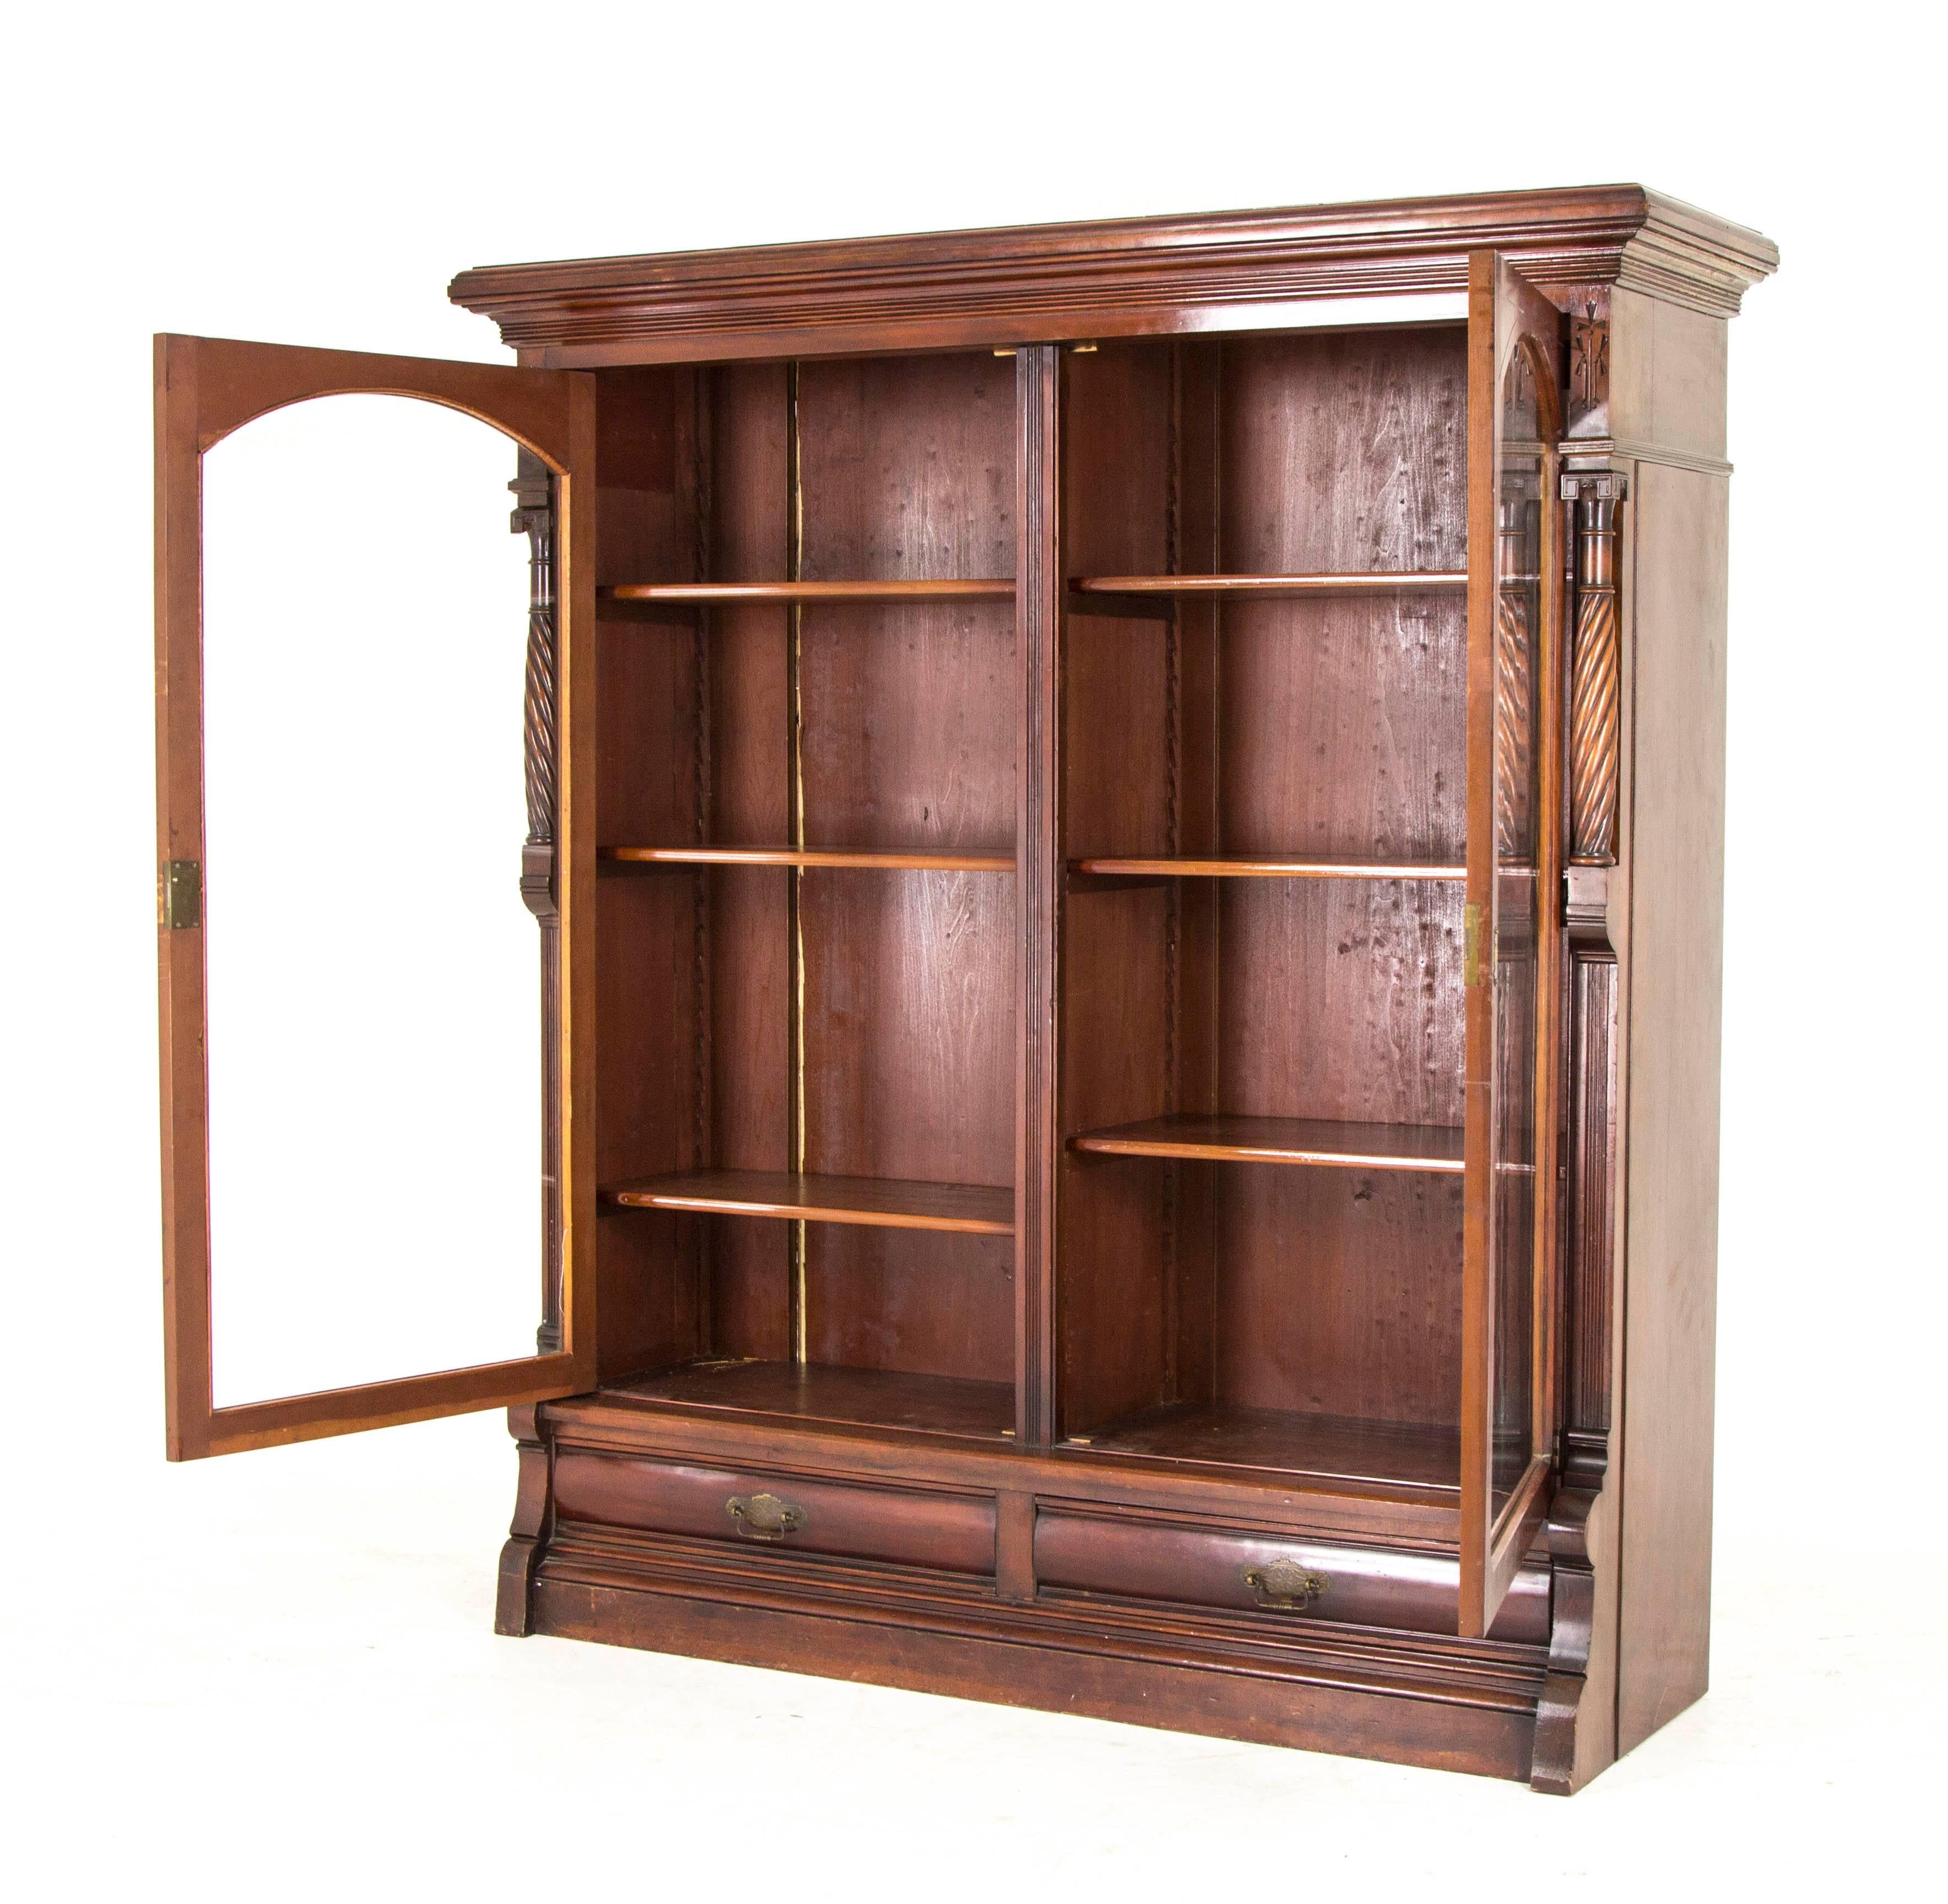 Eastlake bookcase antique display cabinet victorian walnut B813,

American, 1890.
Solid walnut construction
Original old finish
Overhang cornice above
Two original glass doors
Six adjustable interior shelves
Carved column sides
Two dovetailed